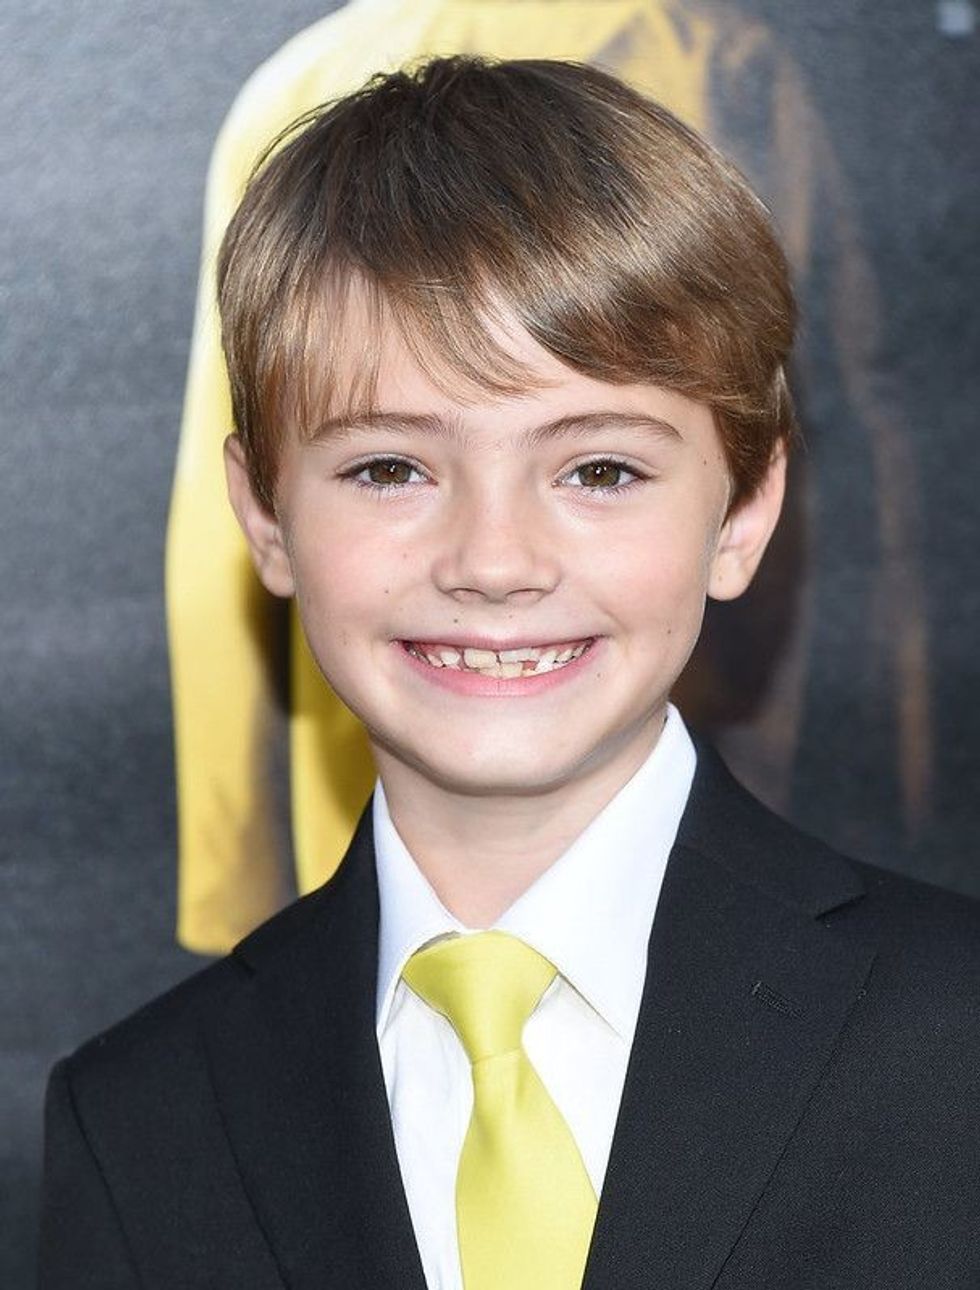 The young actor Jackson Robert Scott first appeared on screen in the CBS crime television series 'Criminal Minds'.